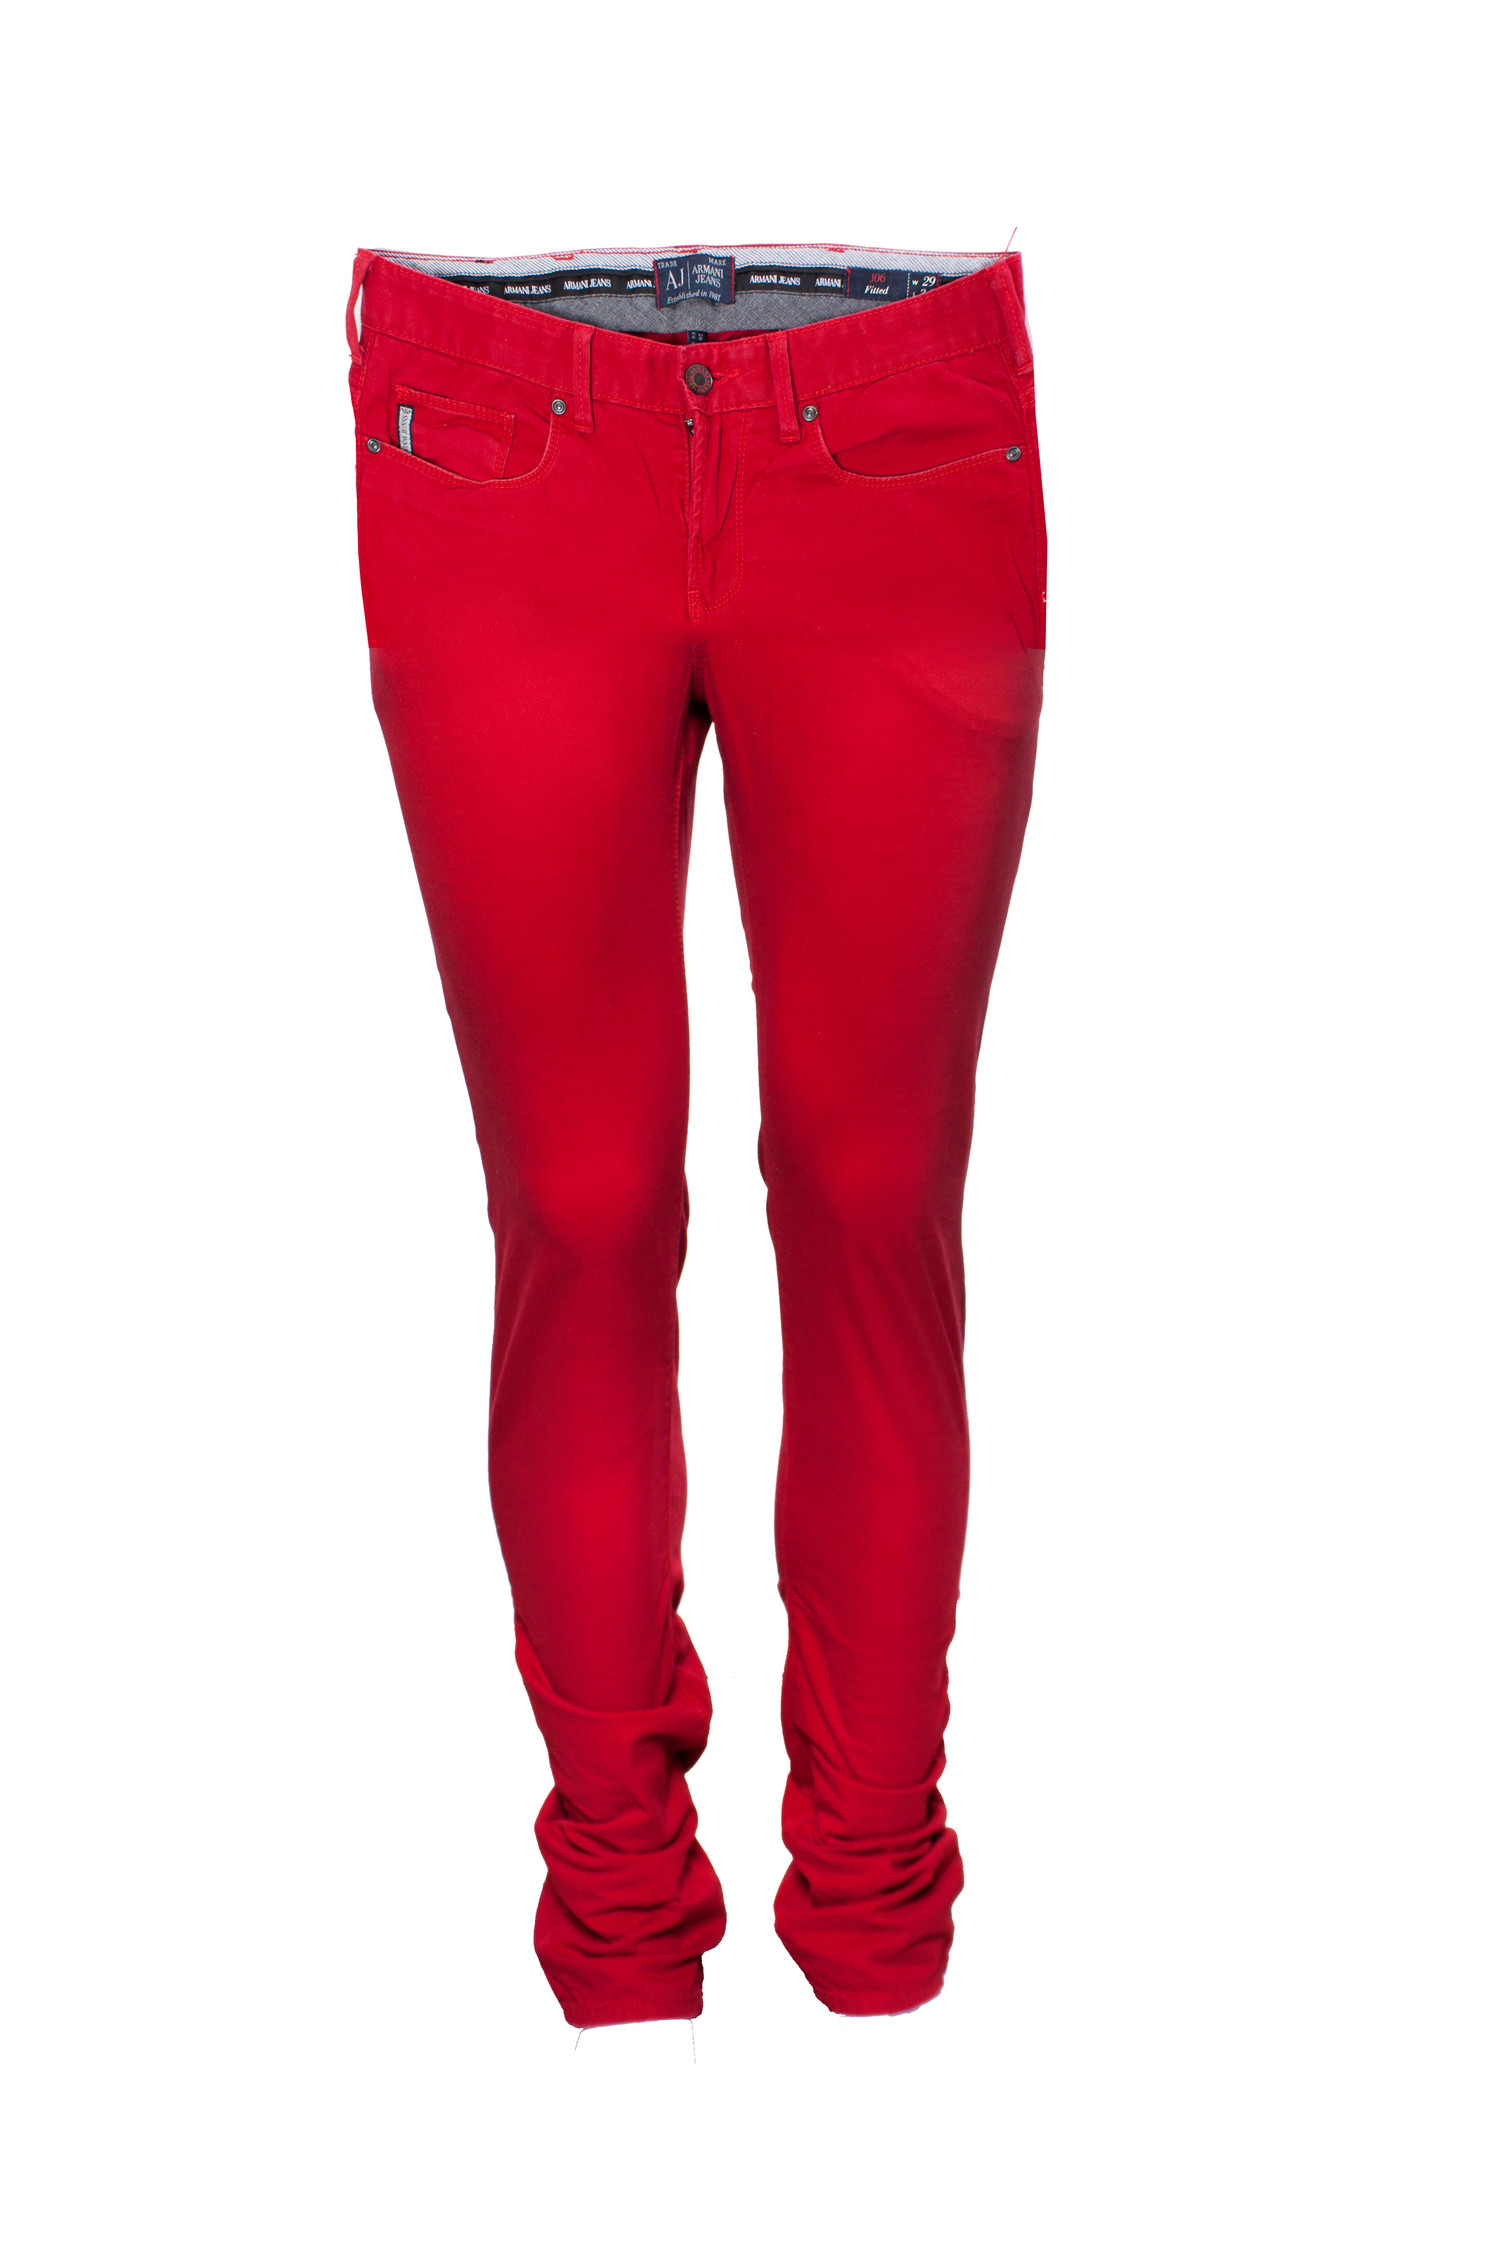 red armani jeans